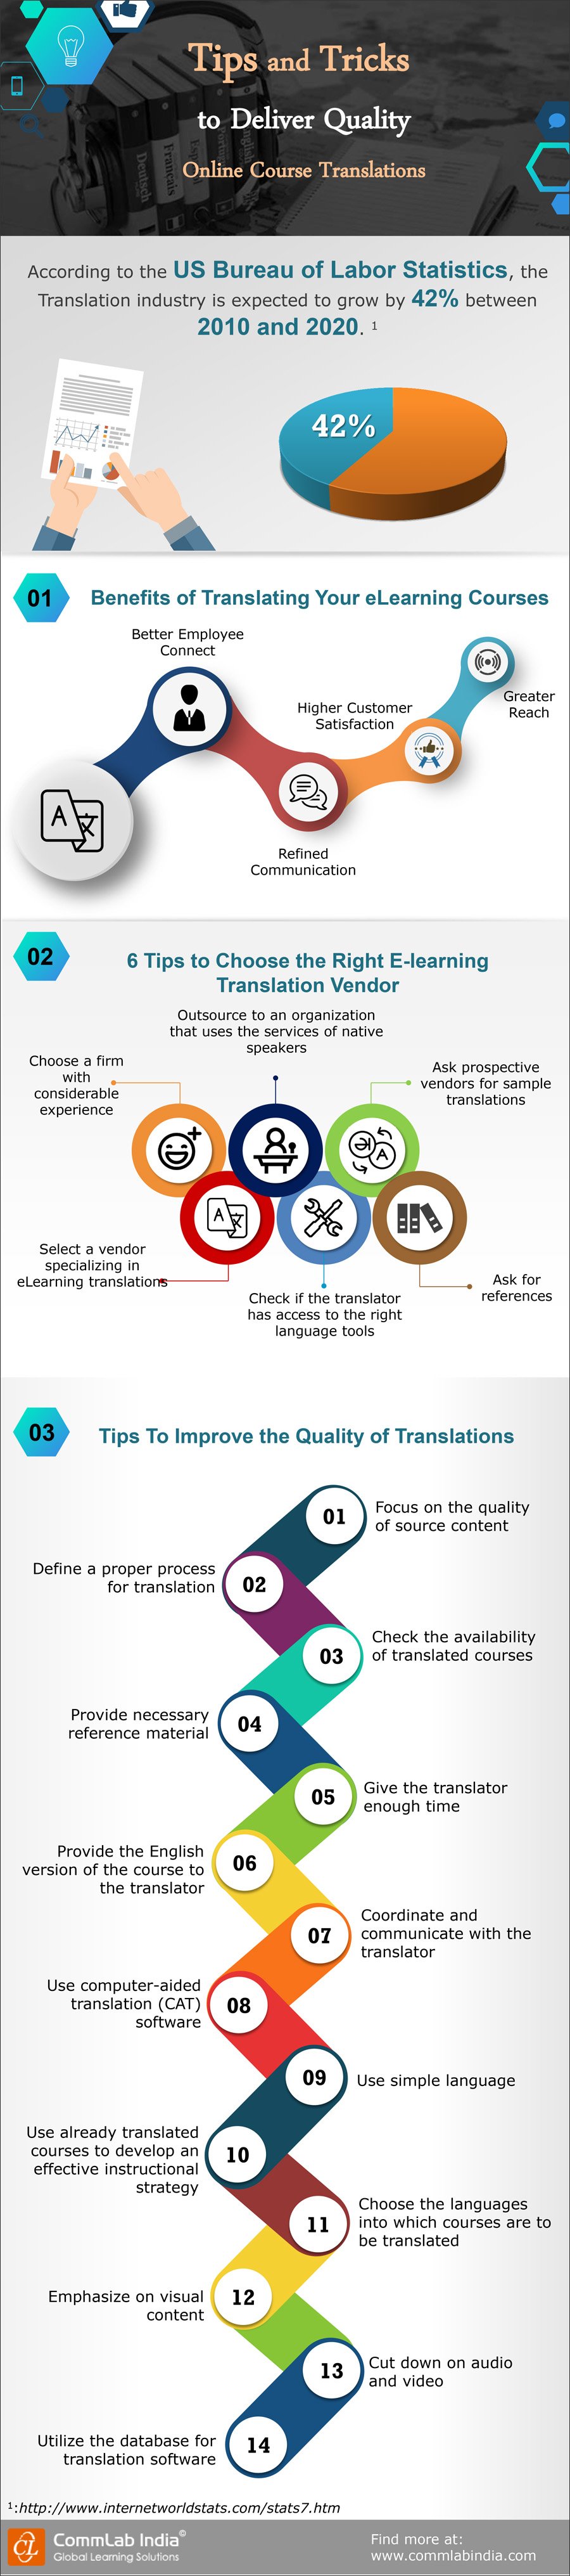 tips-for-high-quality-online-course-translations 